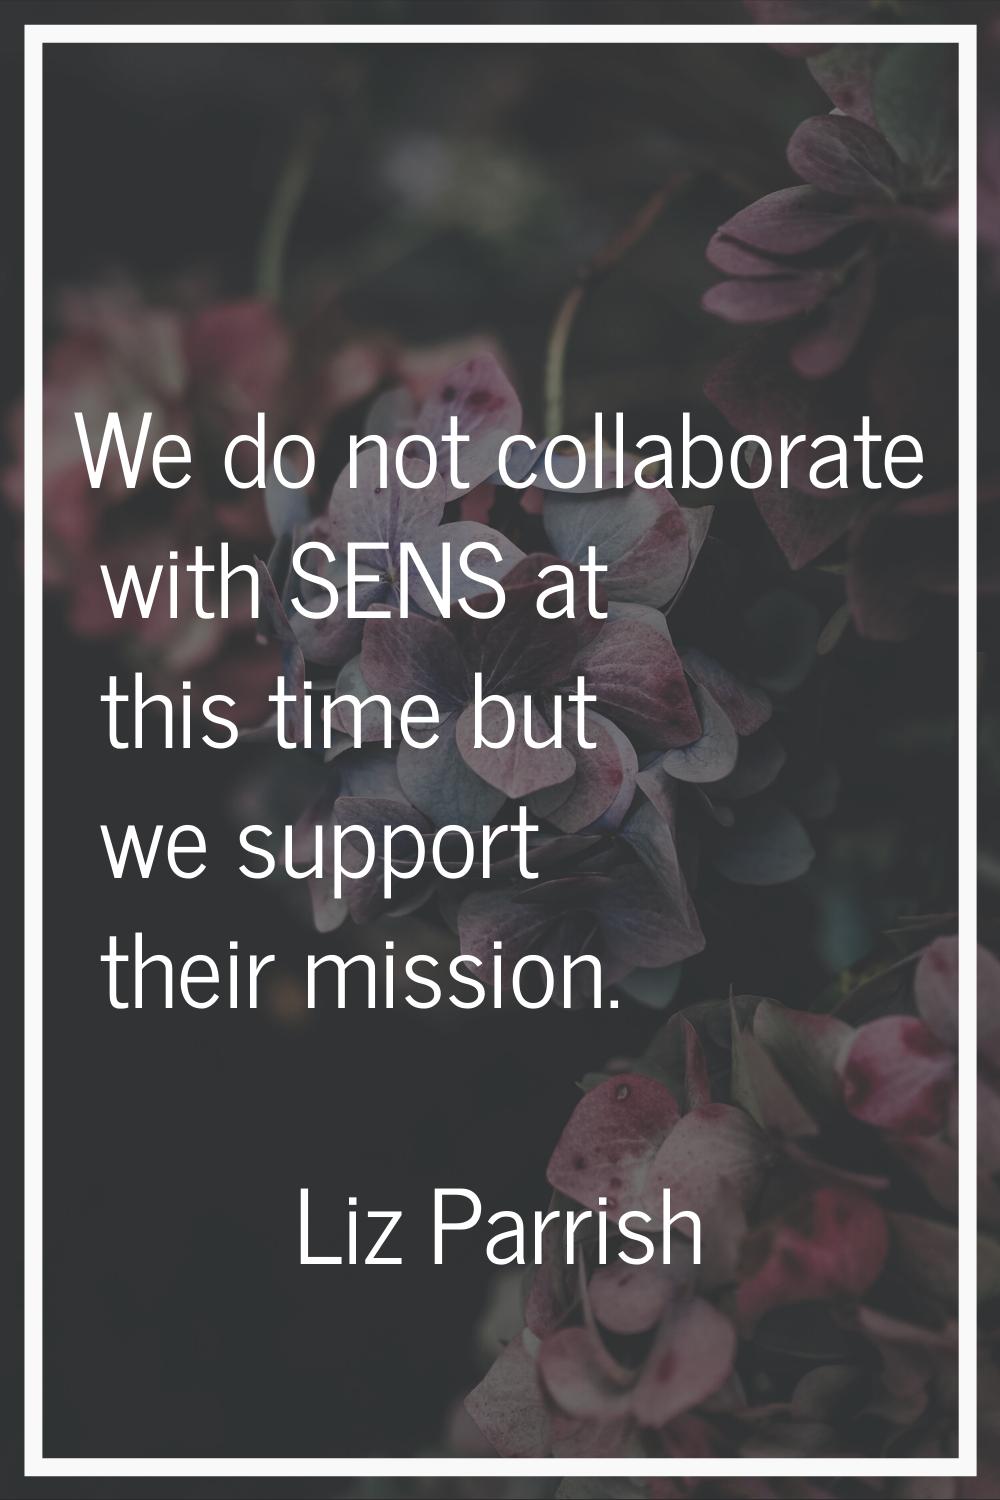 We do not collaborate with SENS at this time but we support their mission.